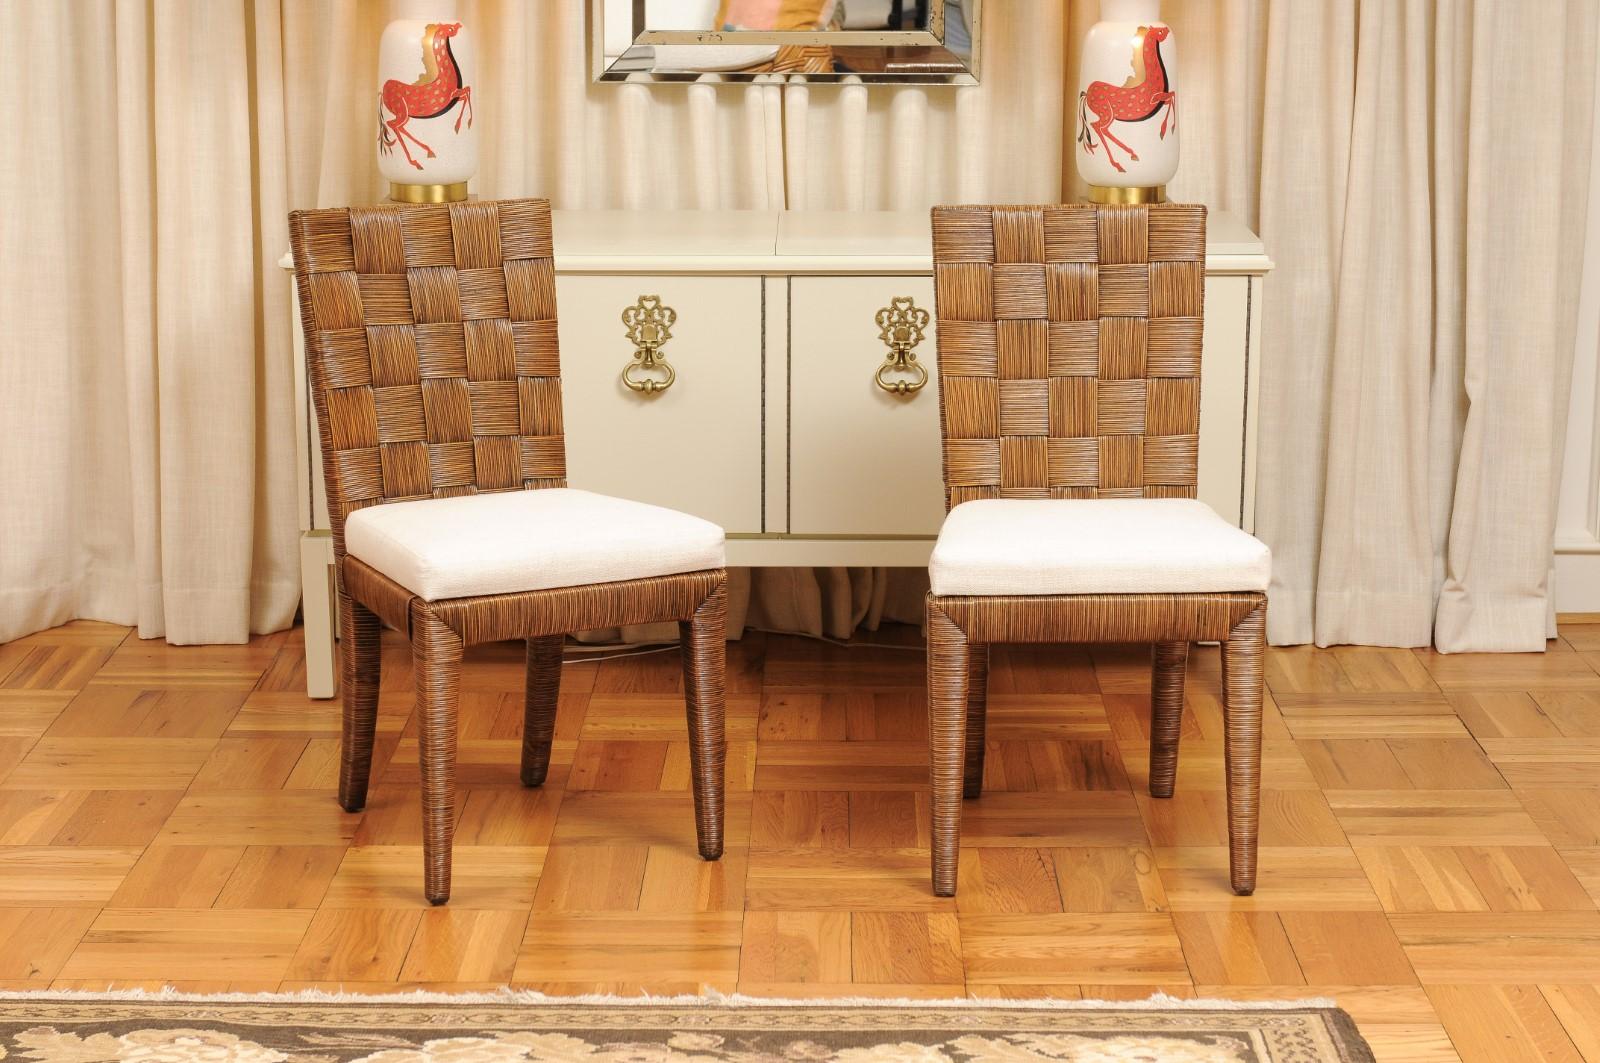 This magnificent set of organic dining chairs is shipped as professionally photographed and described in the listing narrative: Meticulously professionally restored, newly custom upholstered and installation ready. Expert custom upholstery service